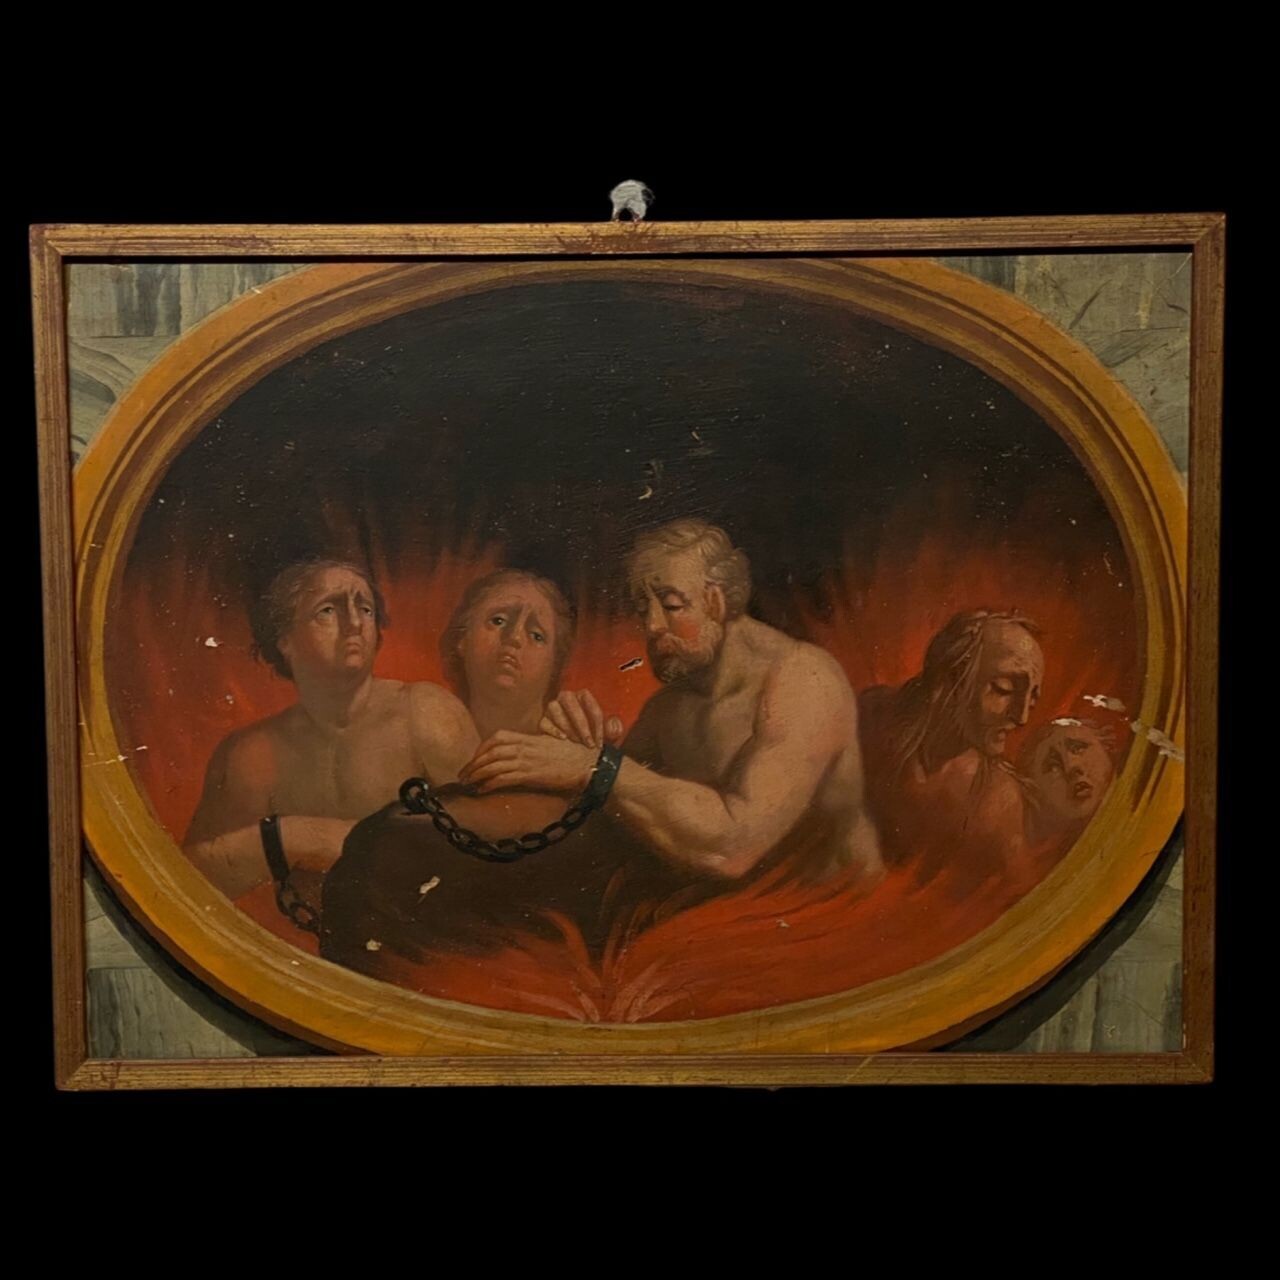 Painting on wood panel Damned Souls, Italy, late 18th century
​